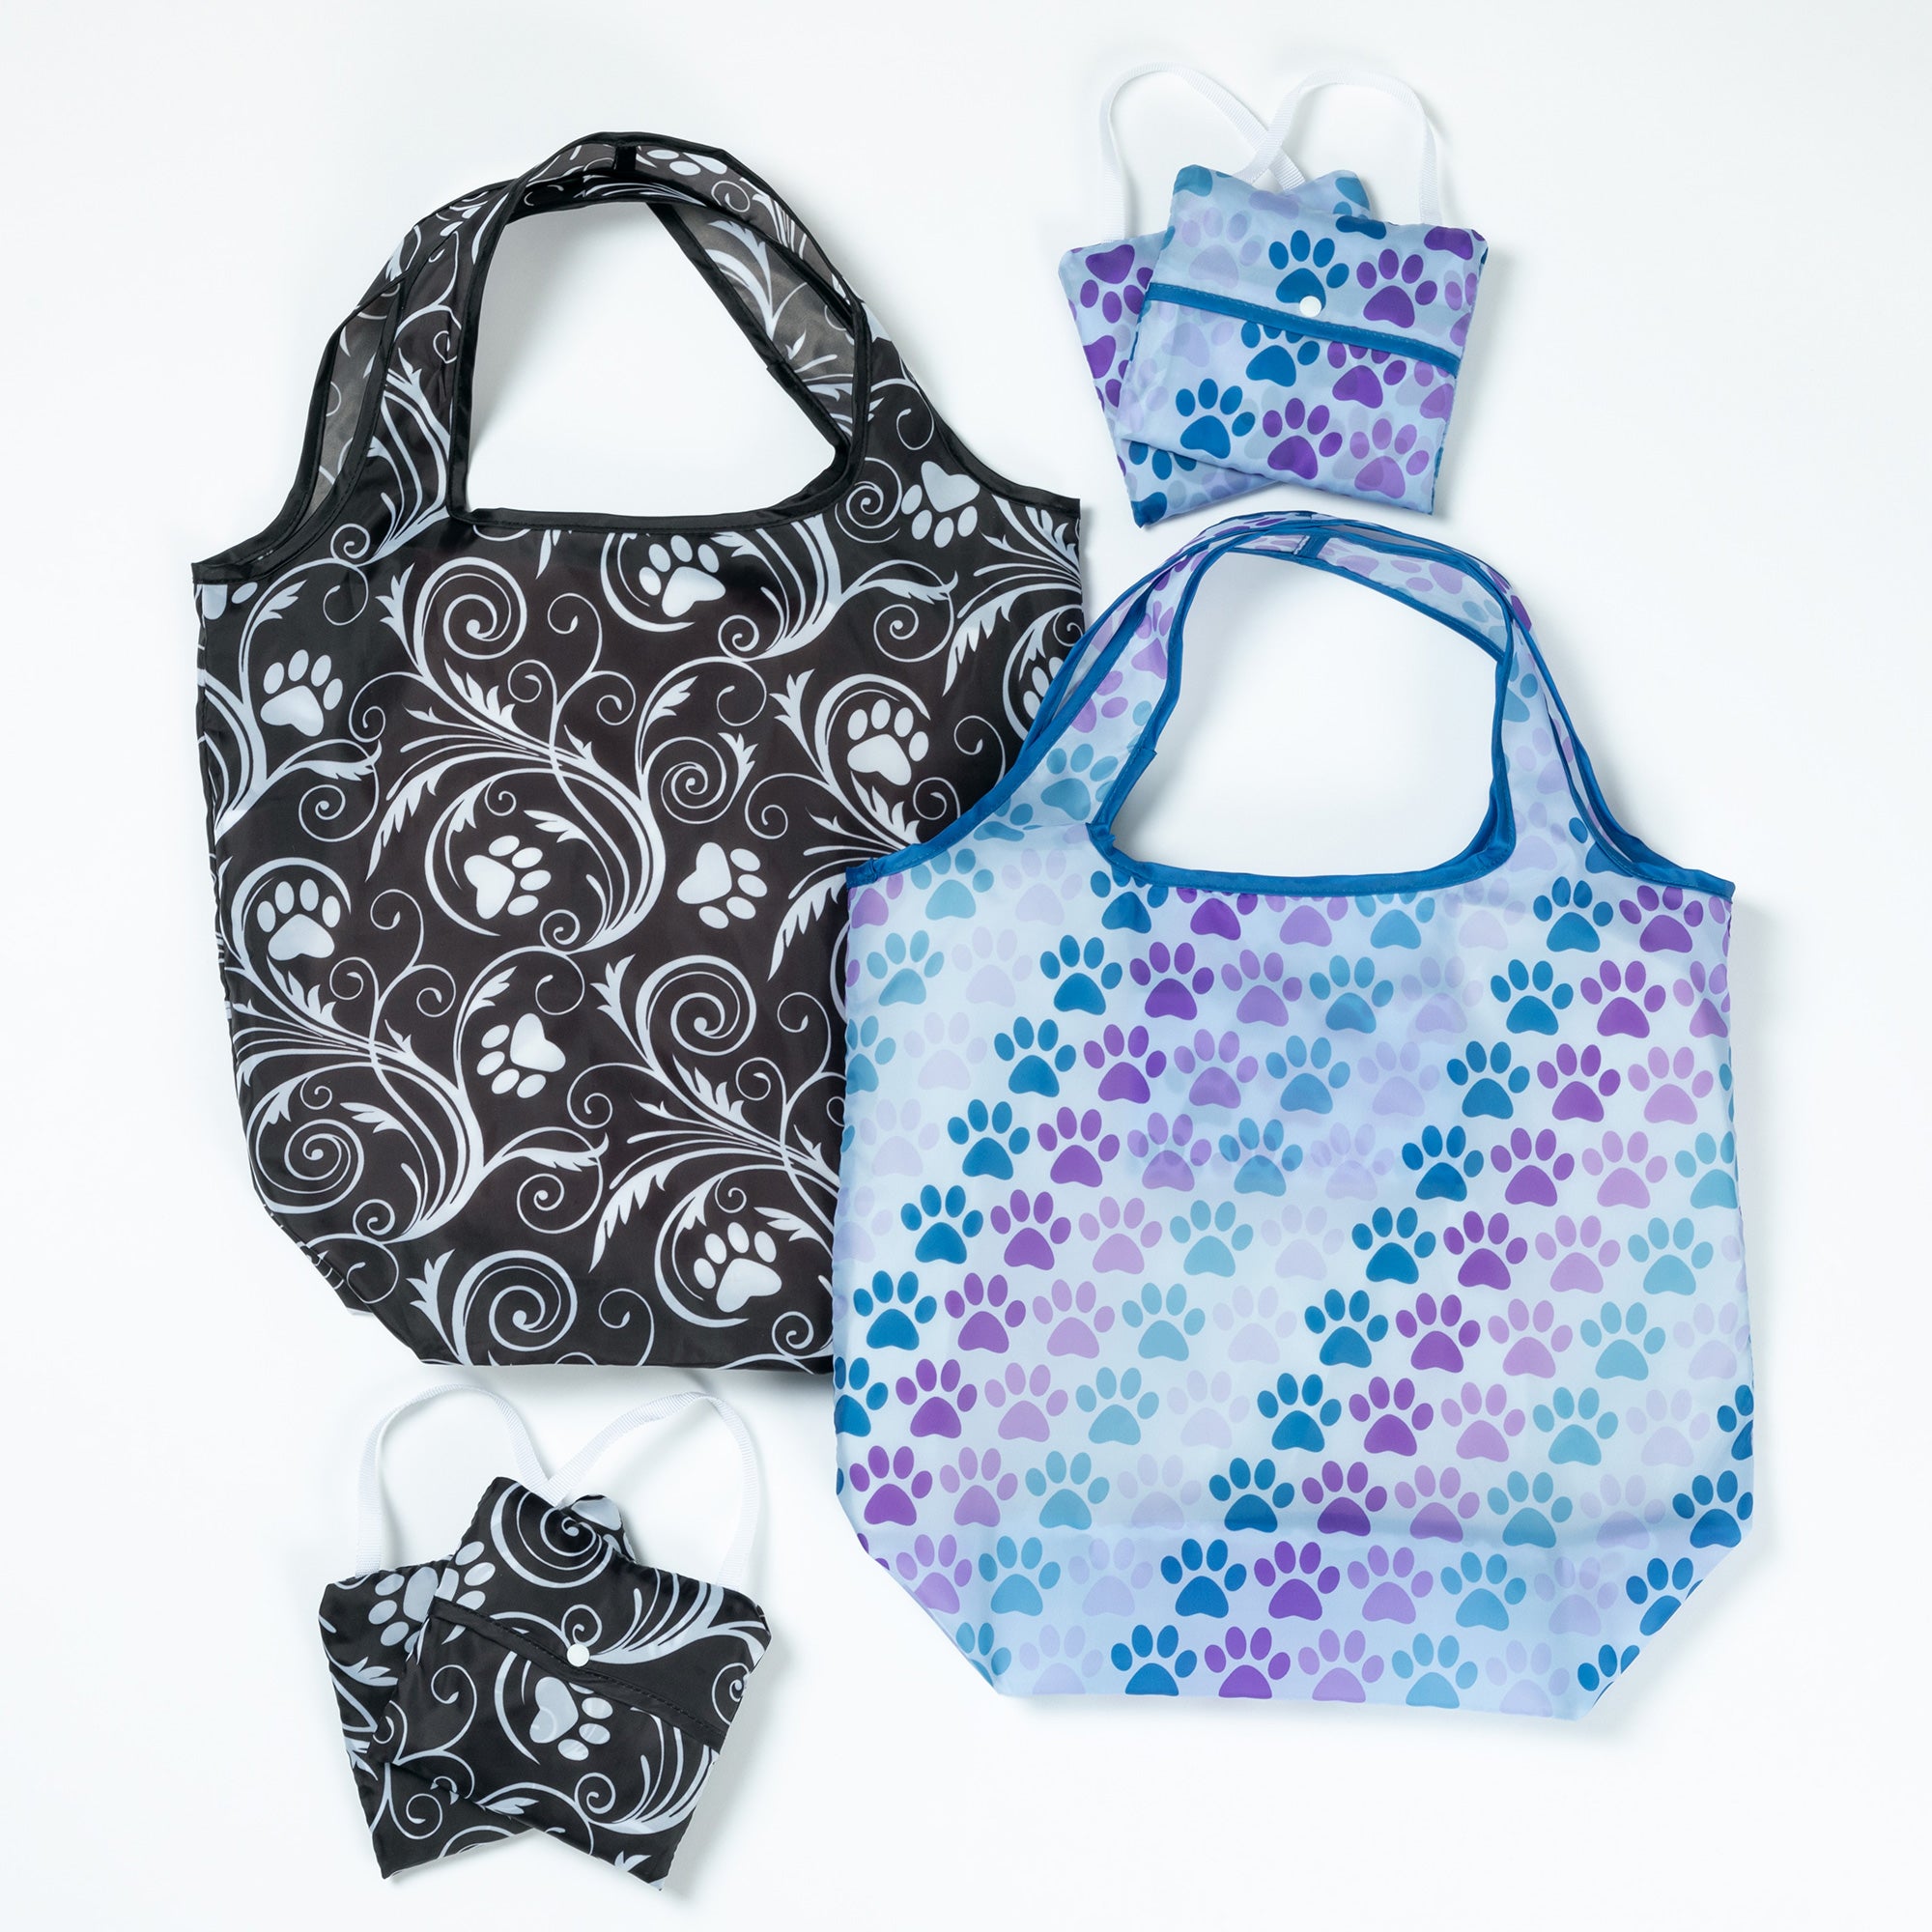 Perfectly Patterned Shopping Totes - Set Of 3 - Diagonal Paws